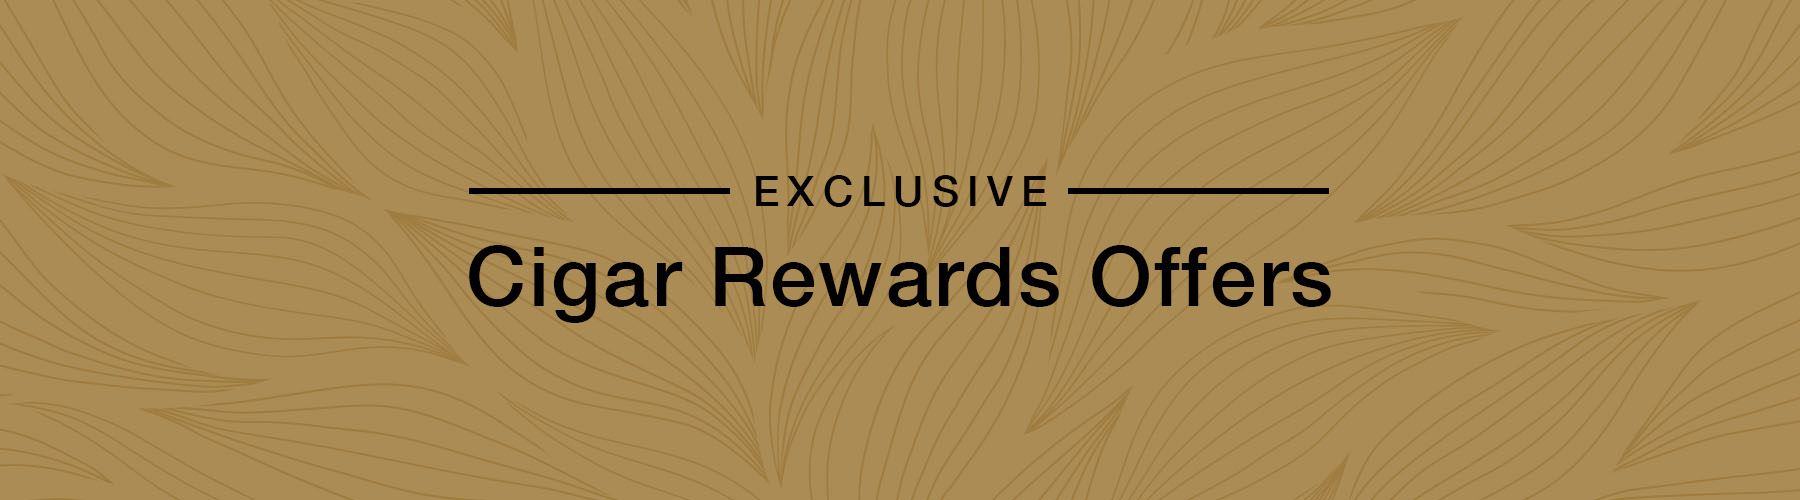 Exclusive Loyalty Offers